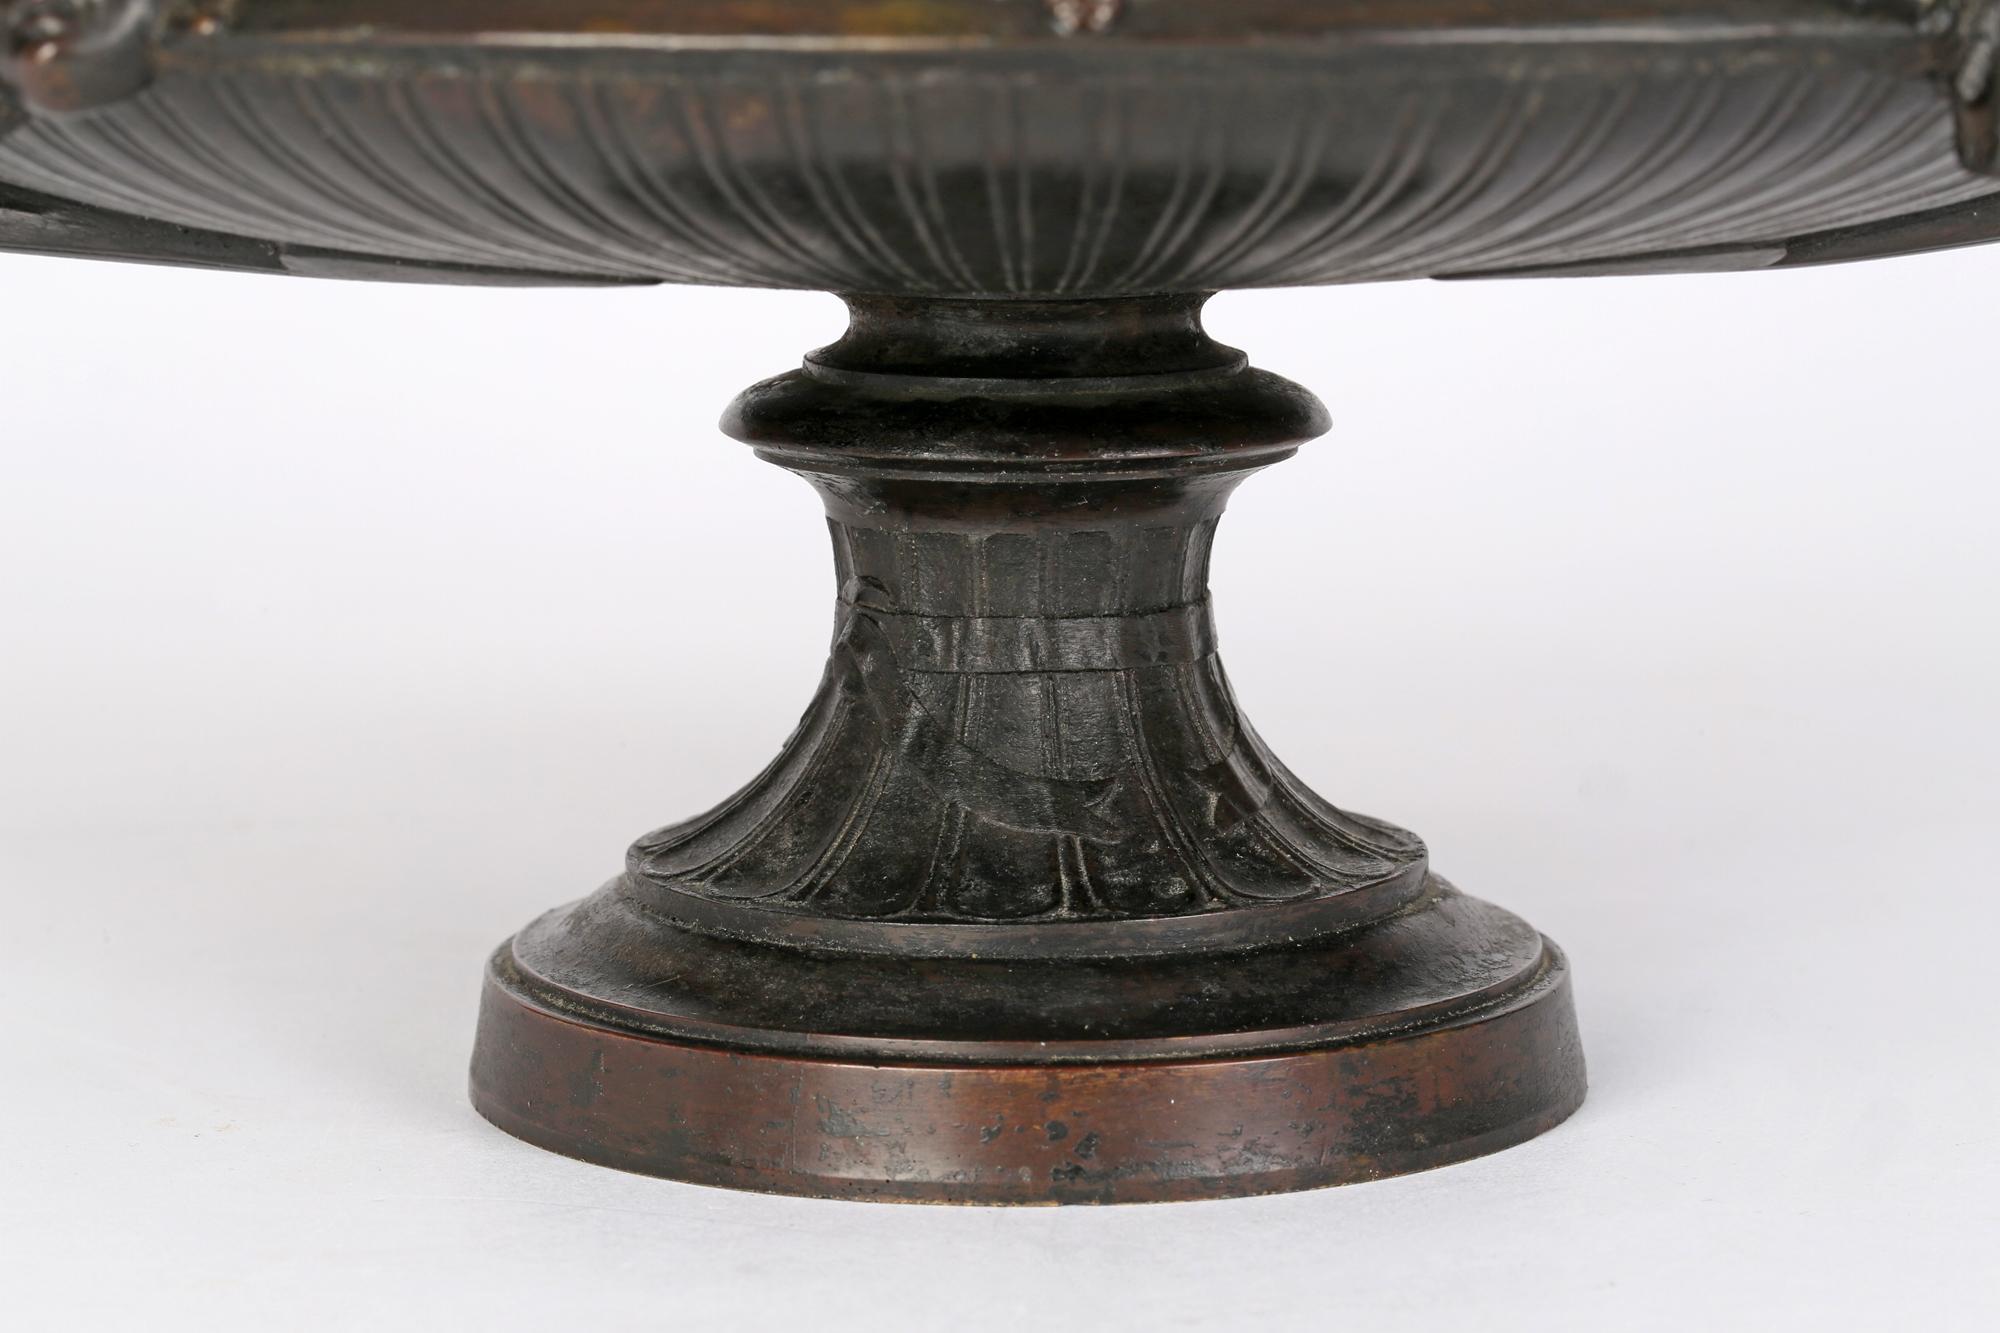 A large and impressive antique French (or possibly Italian Grand Tour) twin handled bronze tazza or shallow bowl decorated with masks dating from the 19th century. The large rounded tazza stands raised on a central column pedestal base and has a